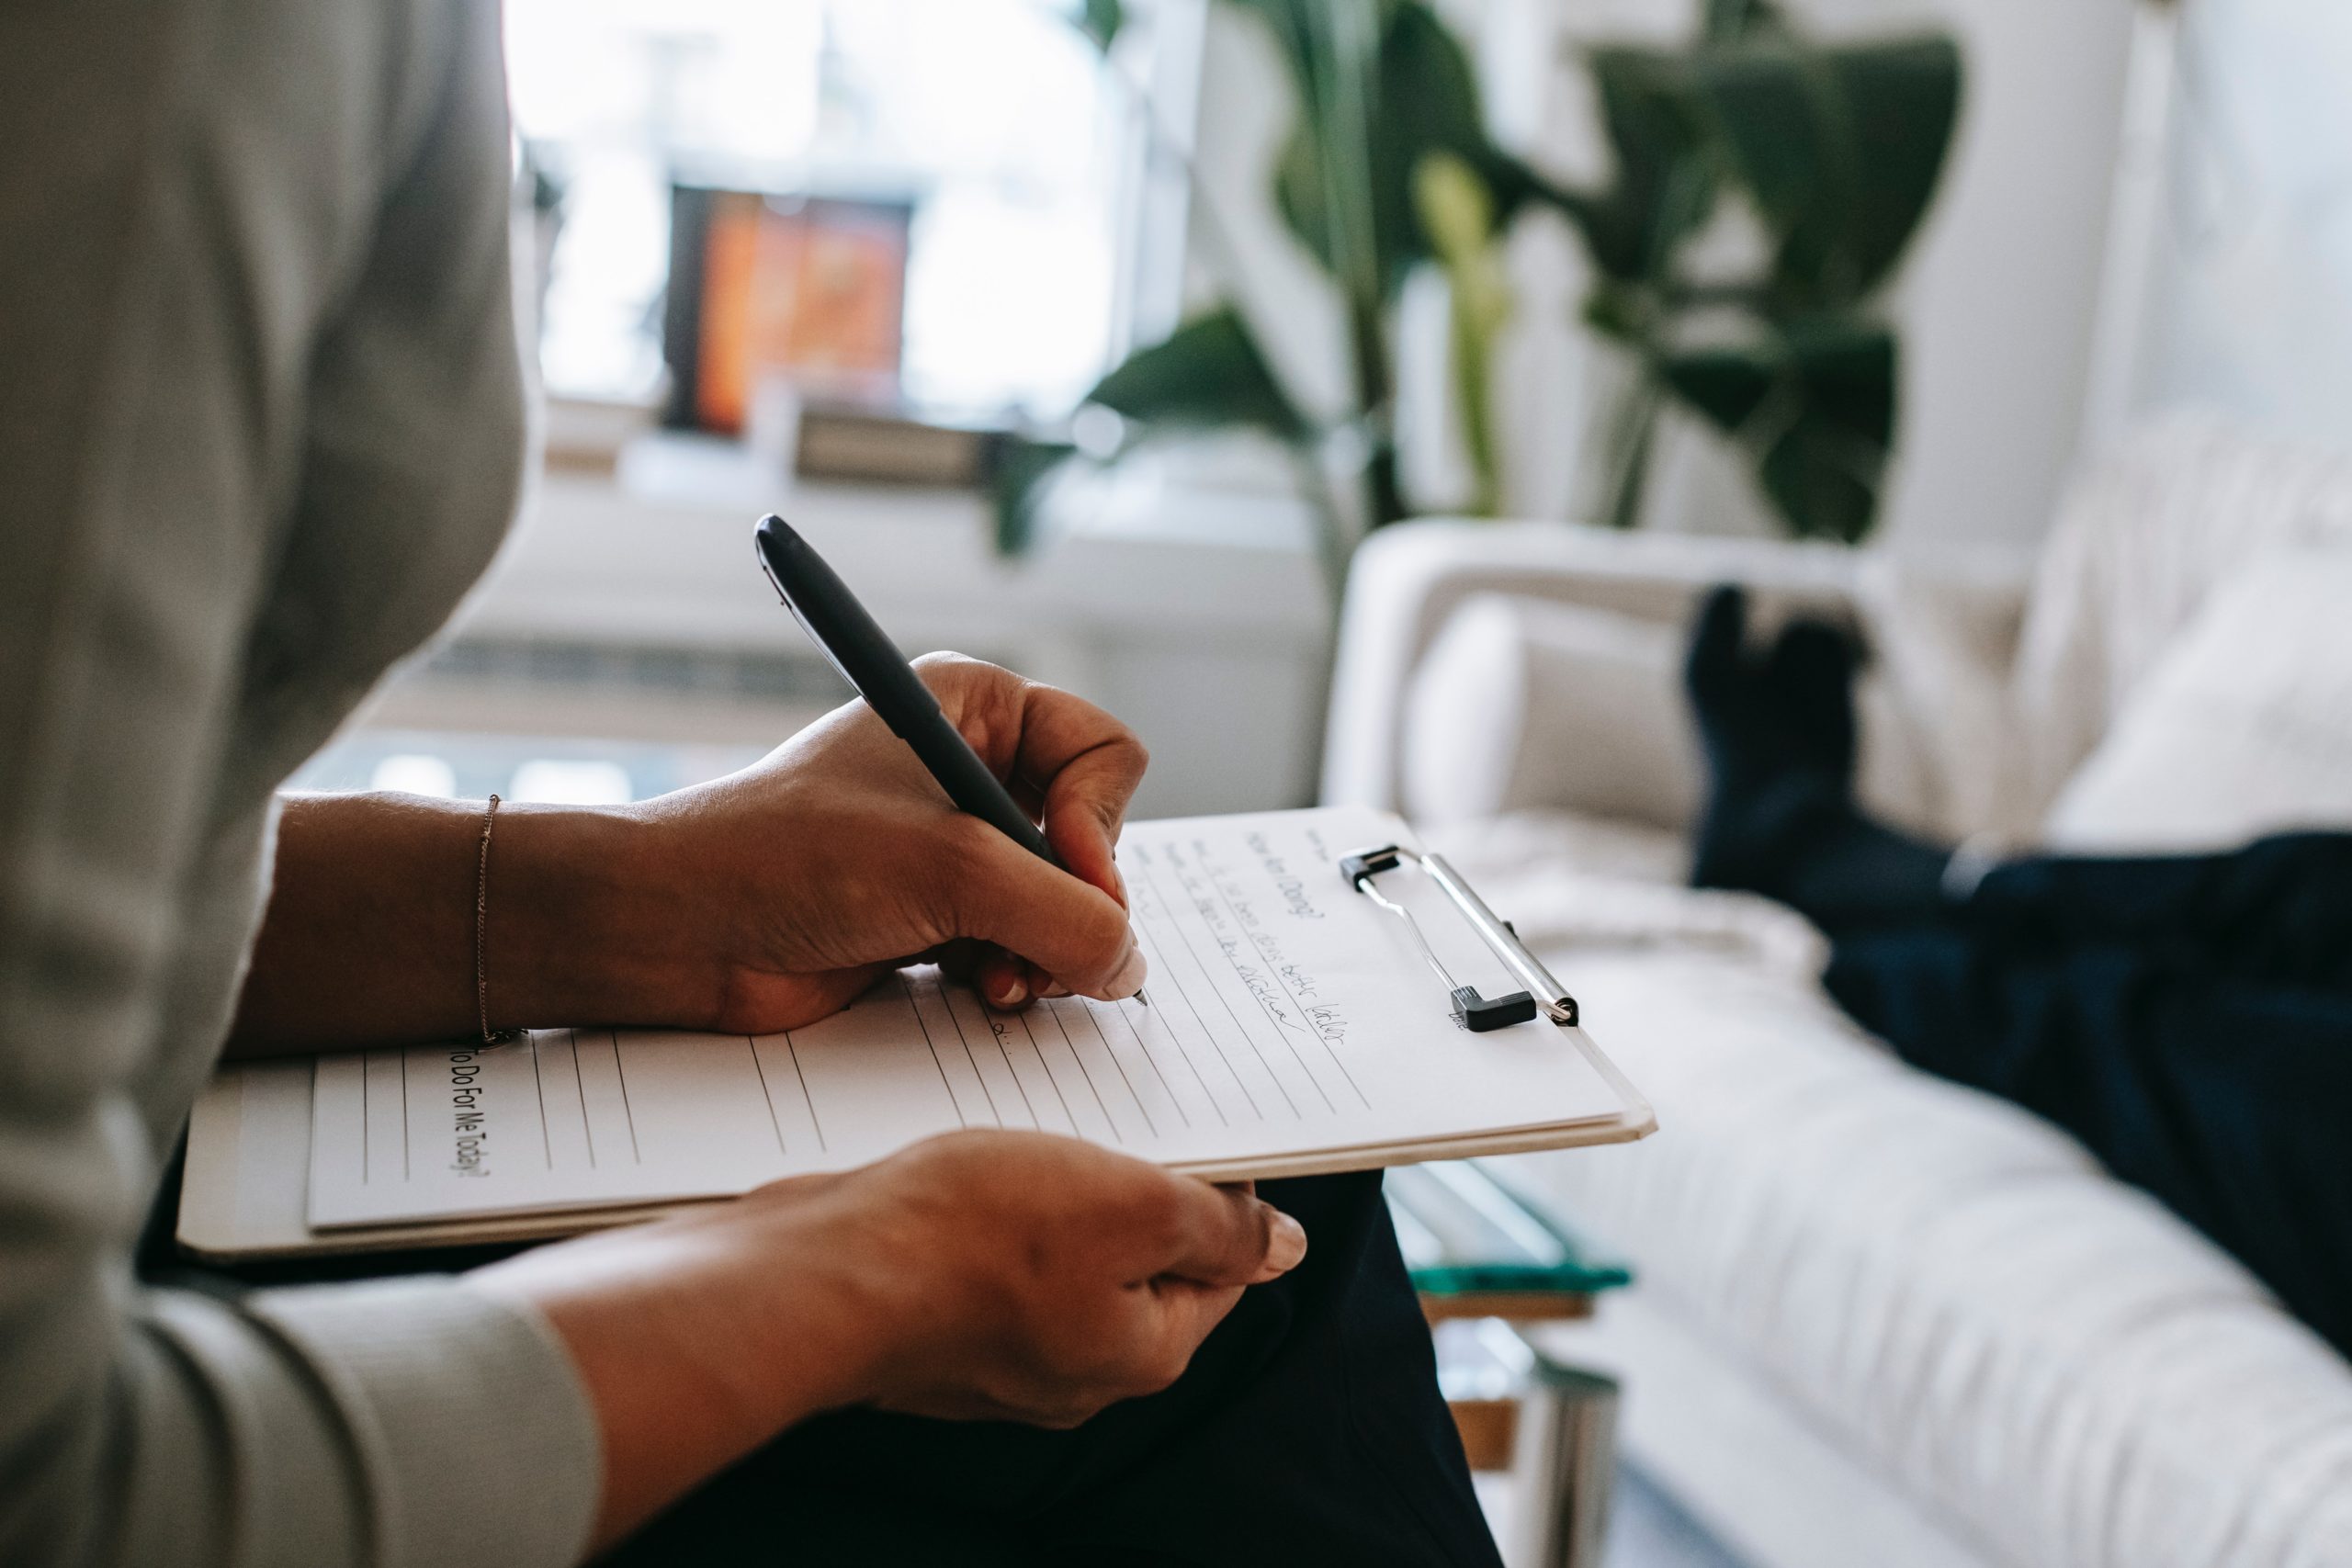 therapist writing notes on intake sheet while patient's legs are stretched out on couch